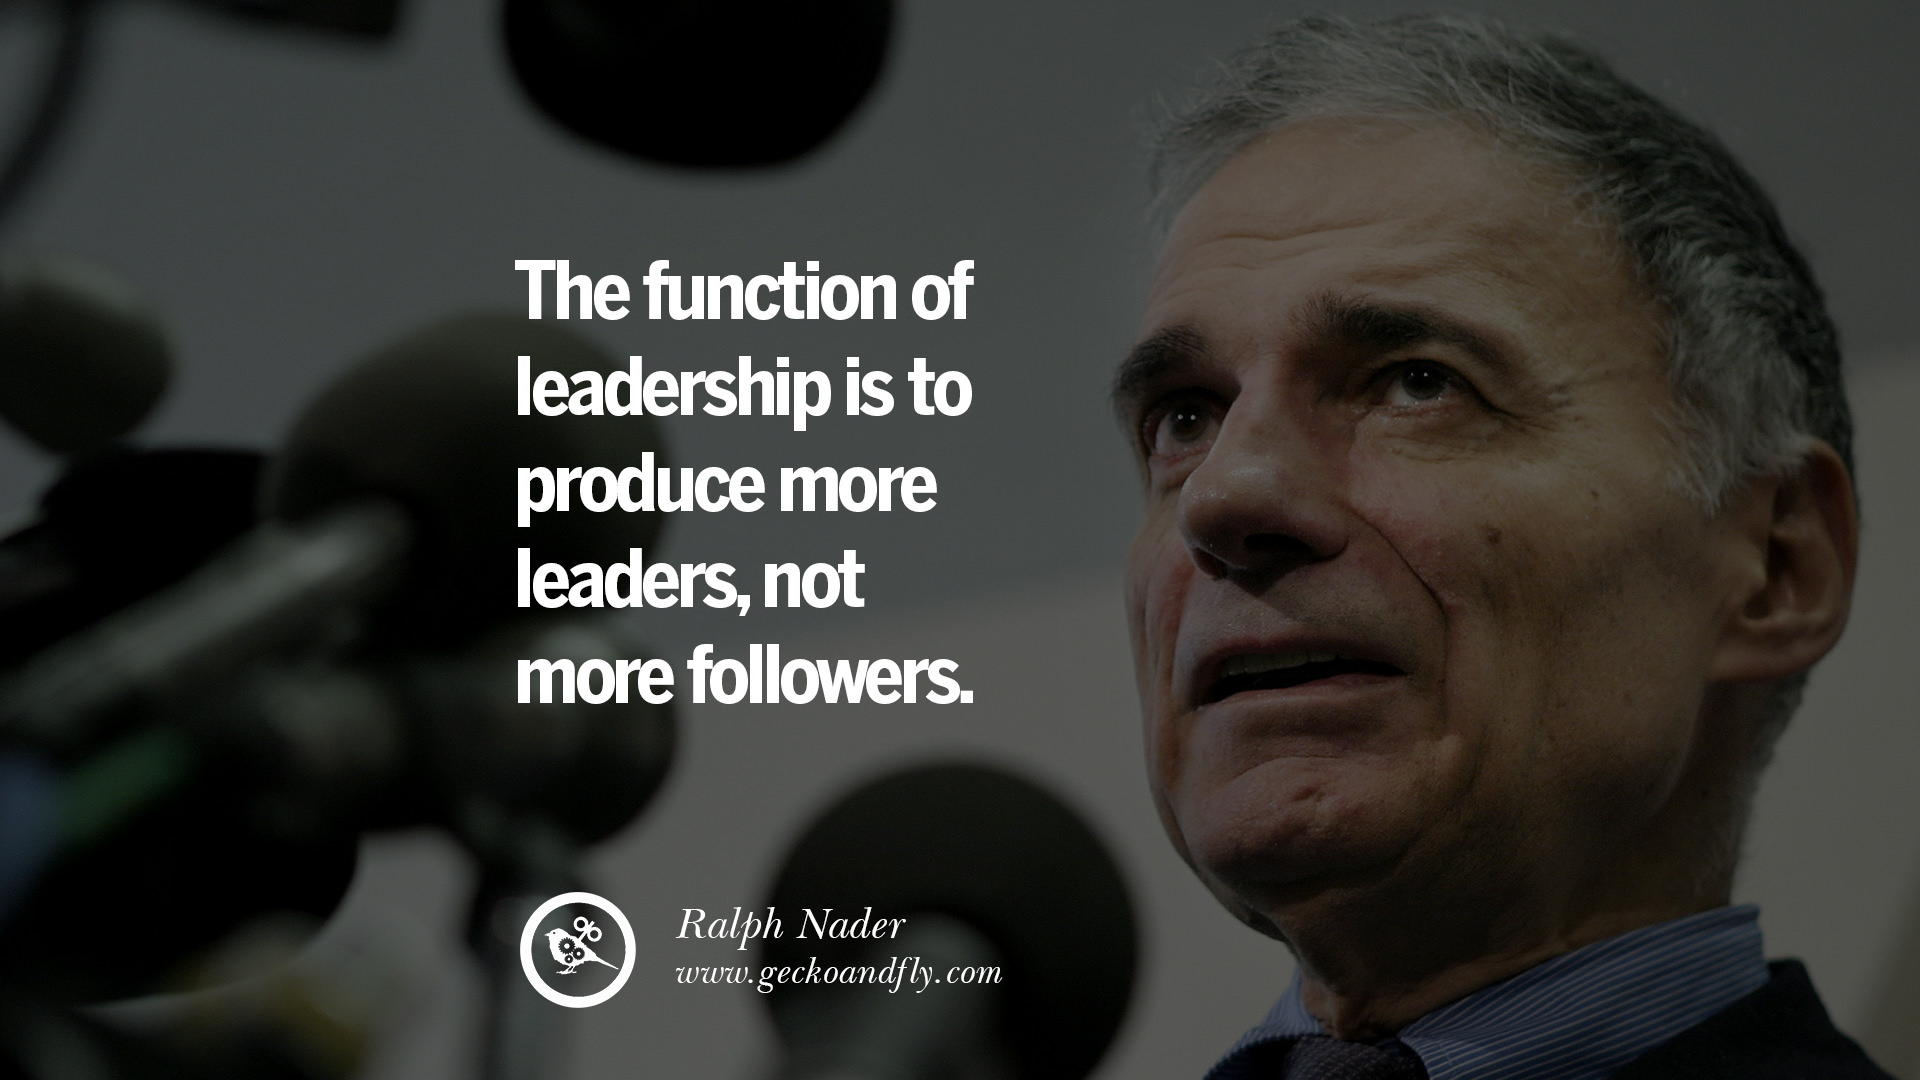 22 Uplifting and Motivational Quotes on Management Leadership